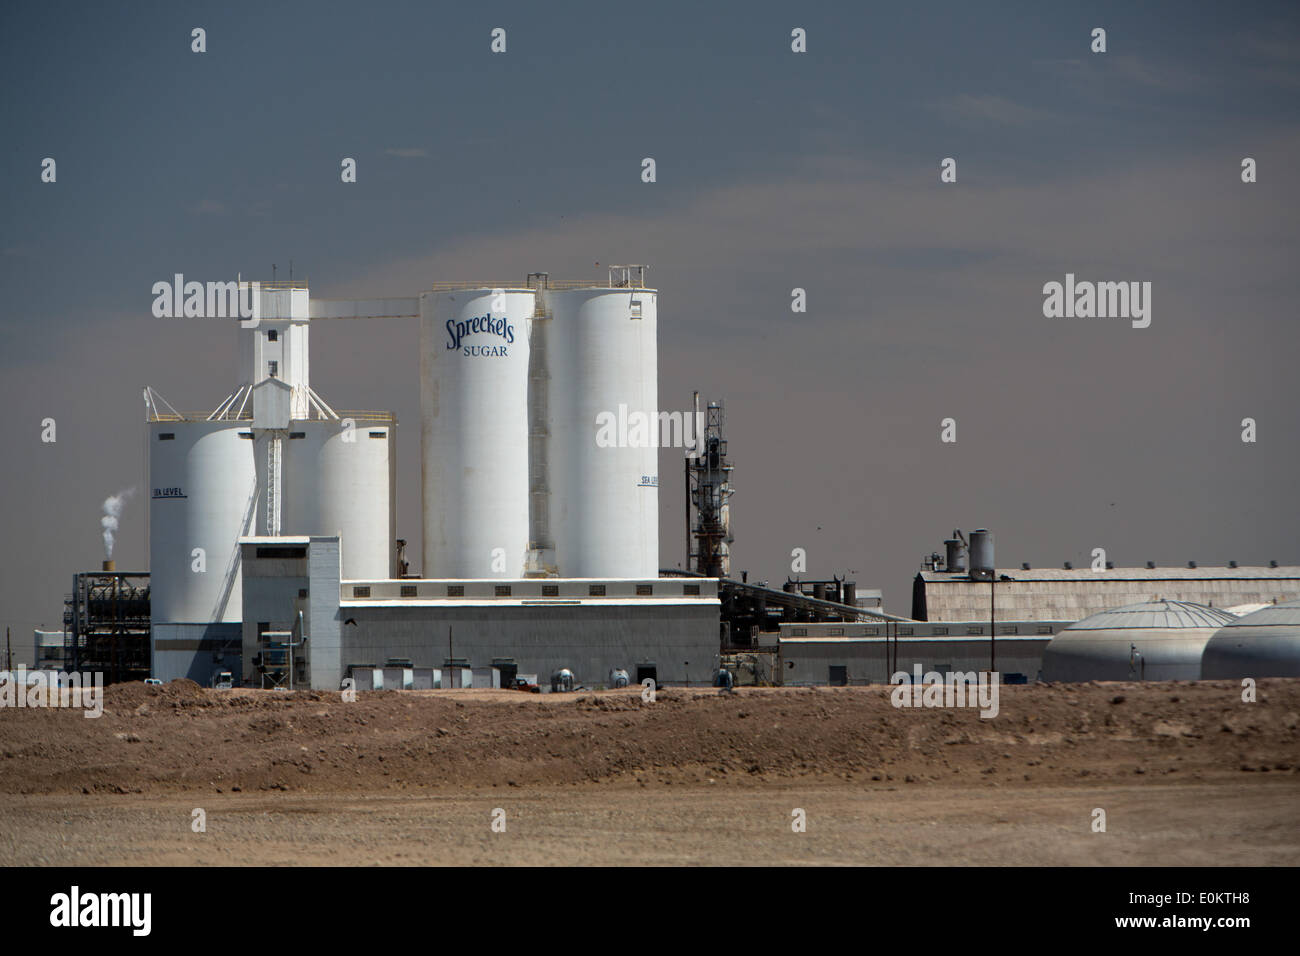 Spreckels Sugar refinery in Brawley in Imperial County, in April 2014. Close to Brawley is the Brawley Seismic Zone (BSZ) that connects the San Andreas fault and Imperial fault. Stock Photo